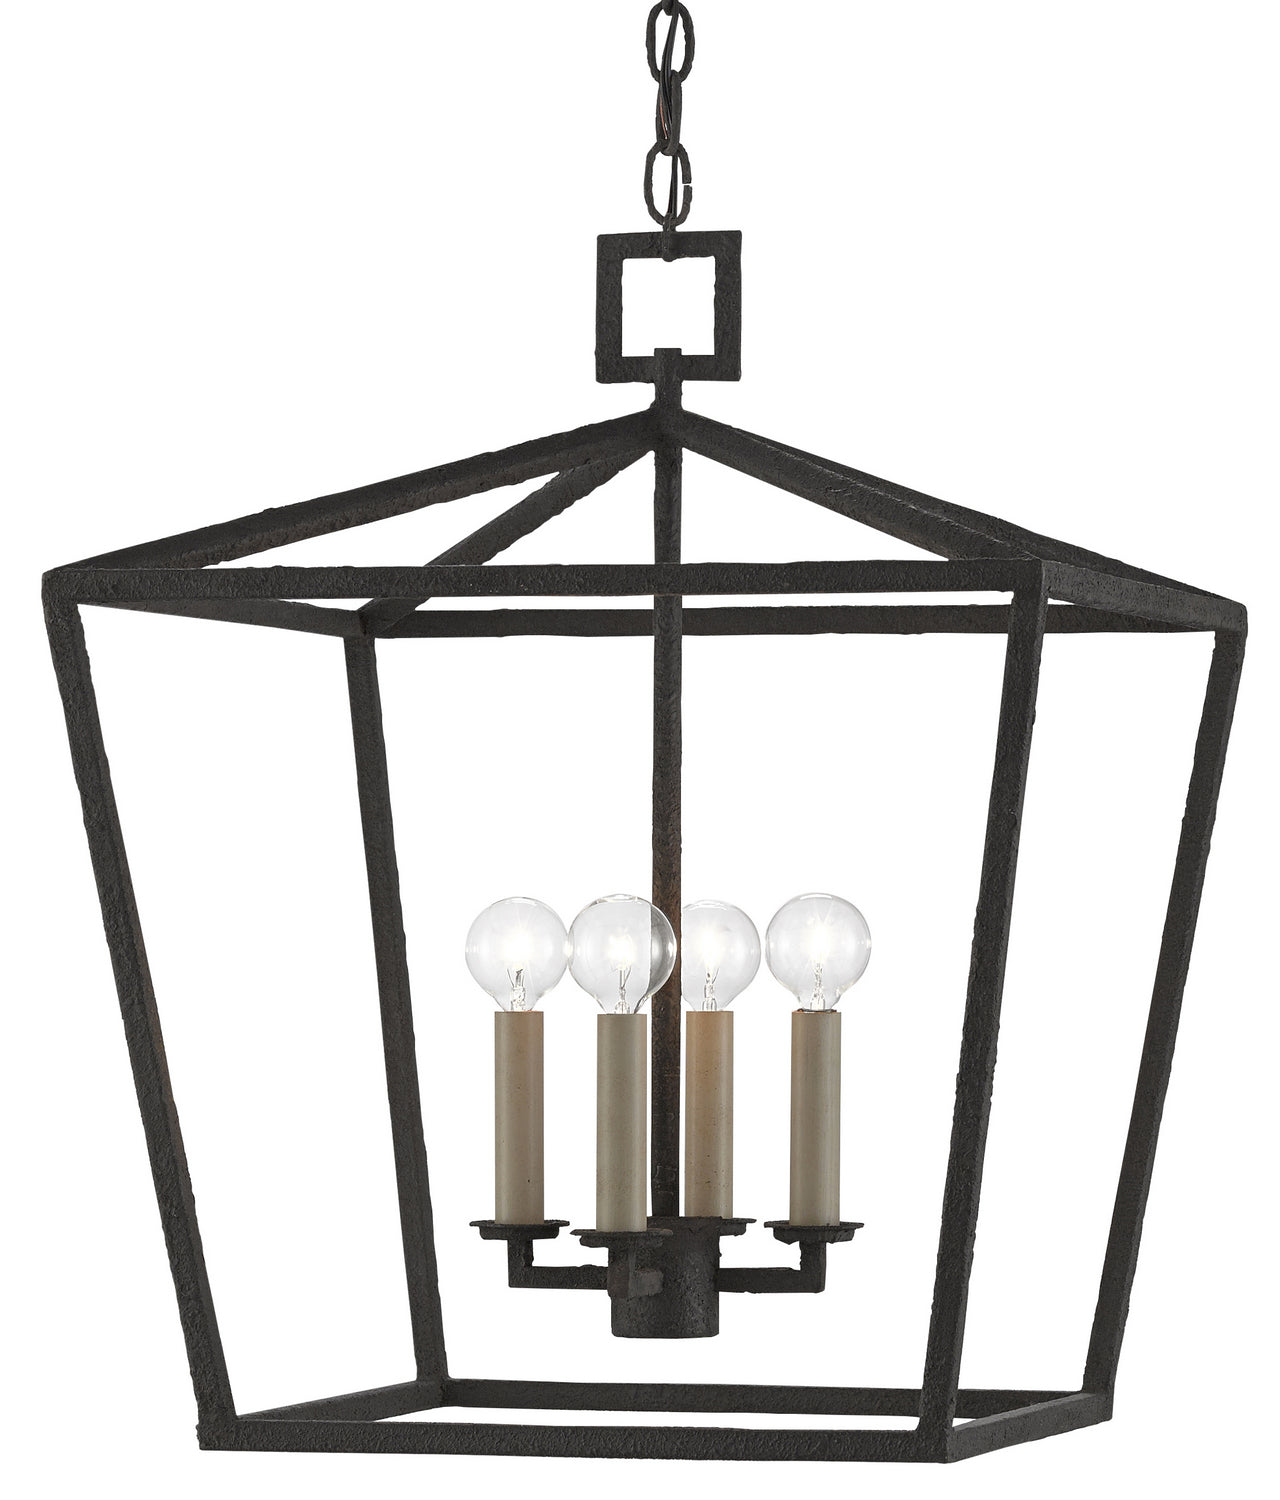 Four Light Lantern from the Denison collection in Molé Black finish